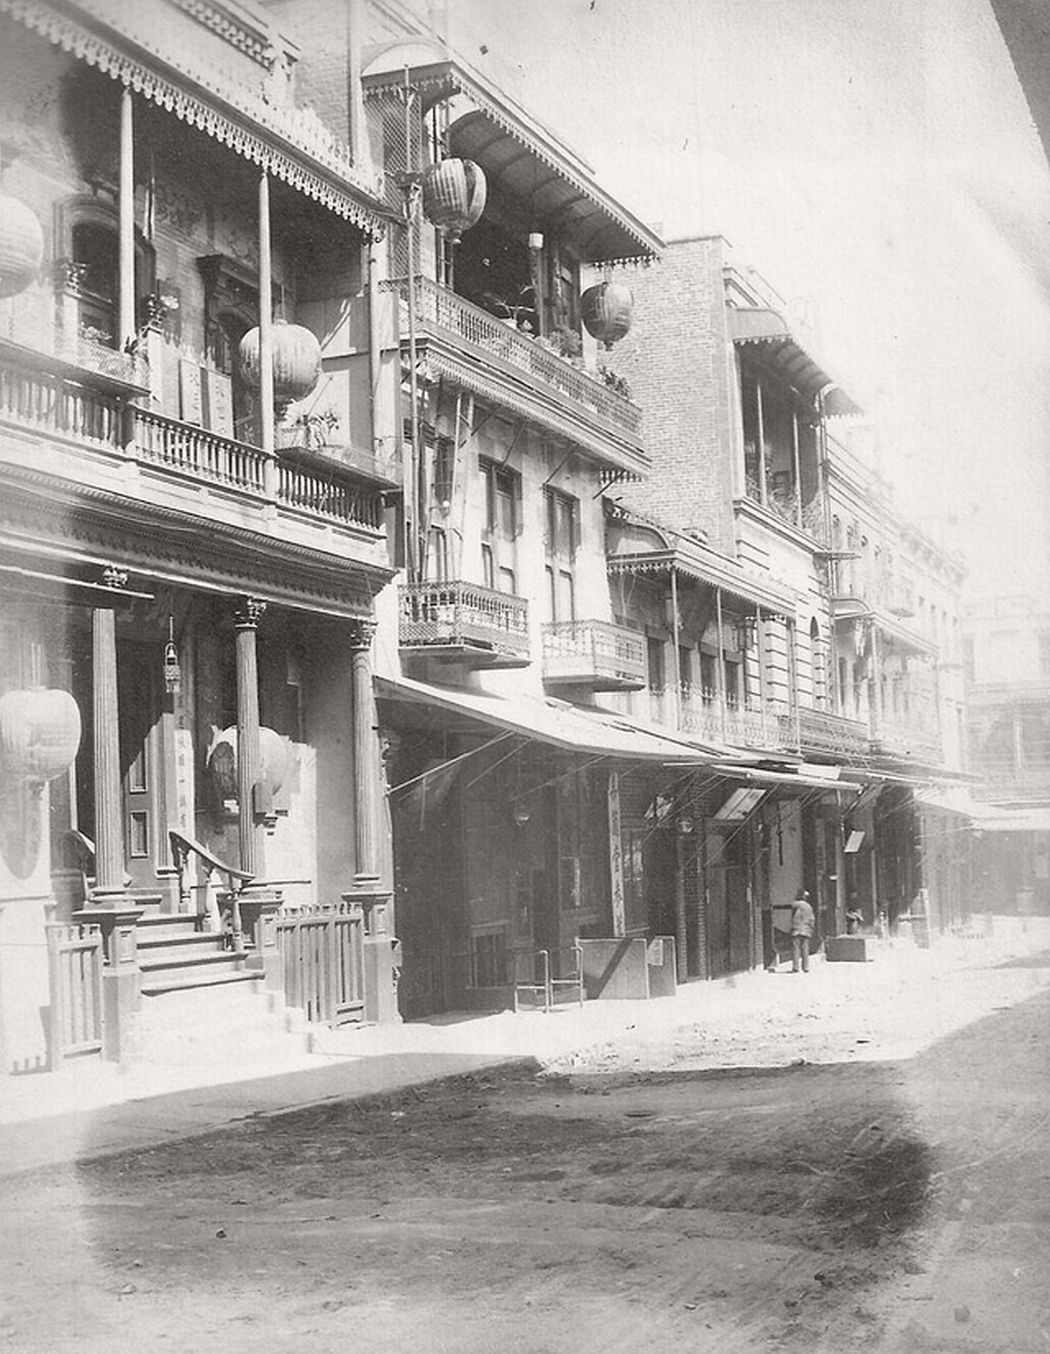 Chinatown in SF, Cal. around 1900